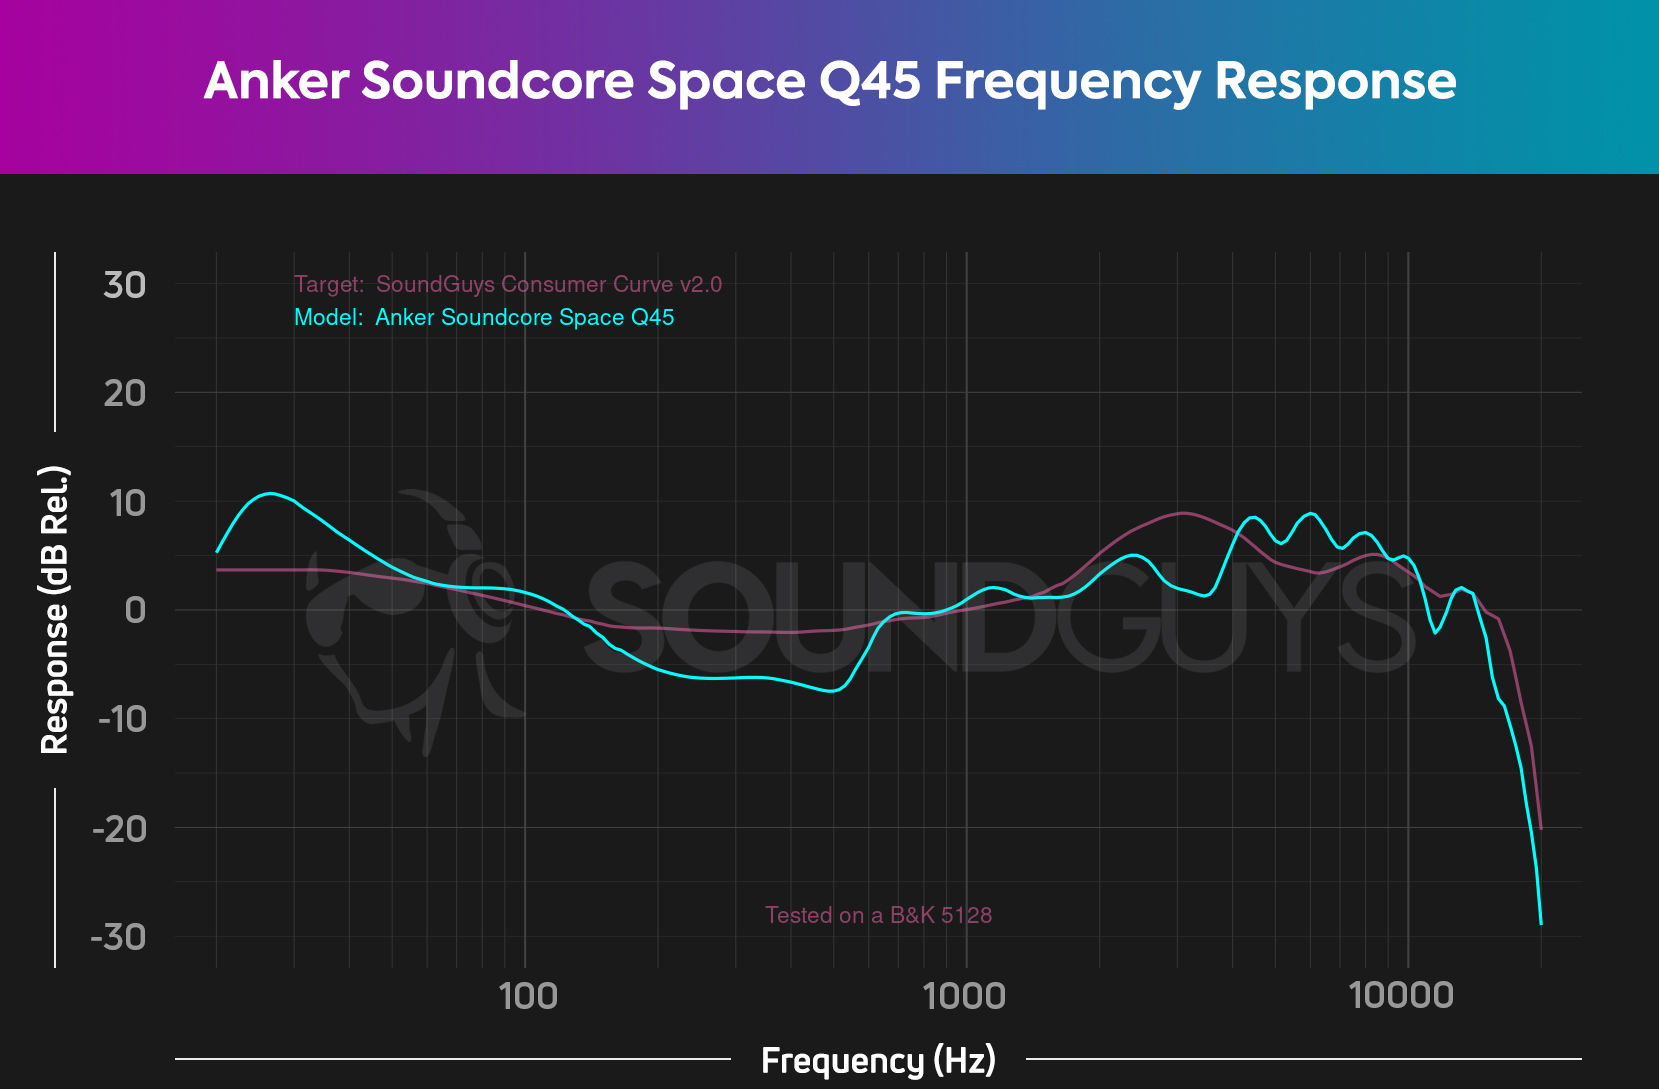 A chart depicts the Anker Soundcore Space Q45 frequency response relative to the SoundGuys Consumer Curve, revealing the Q45 to have a louder bass response than our house curve suggests.